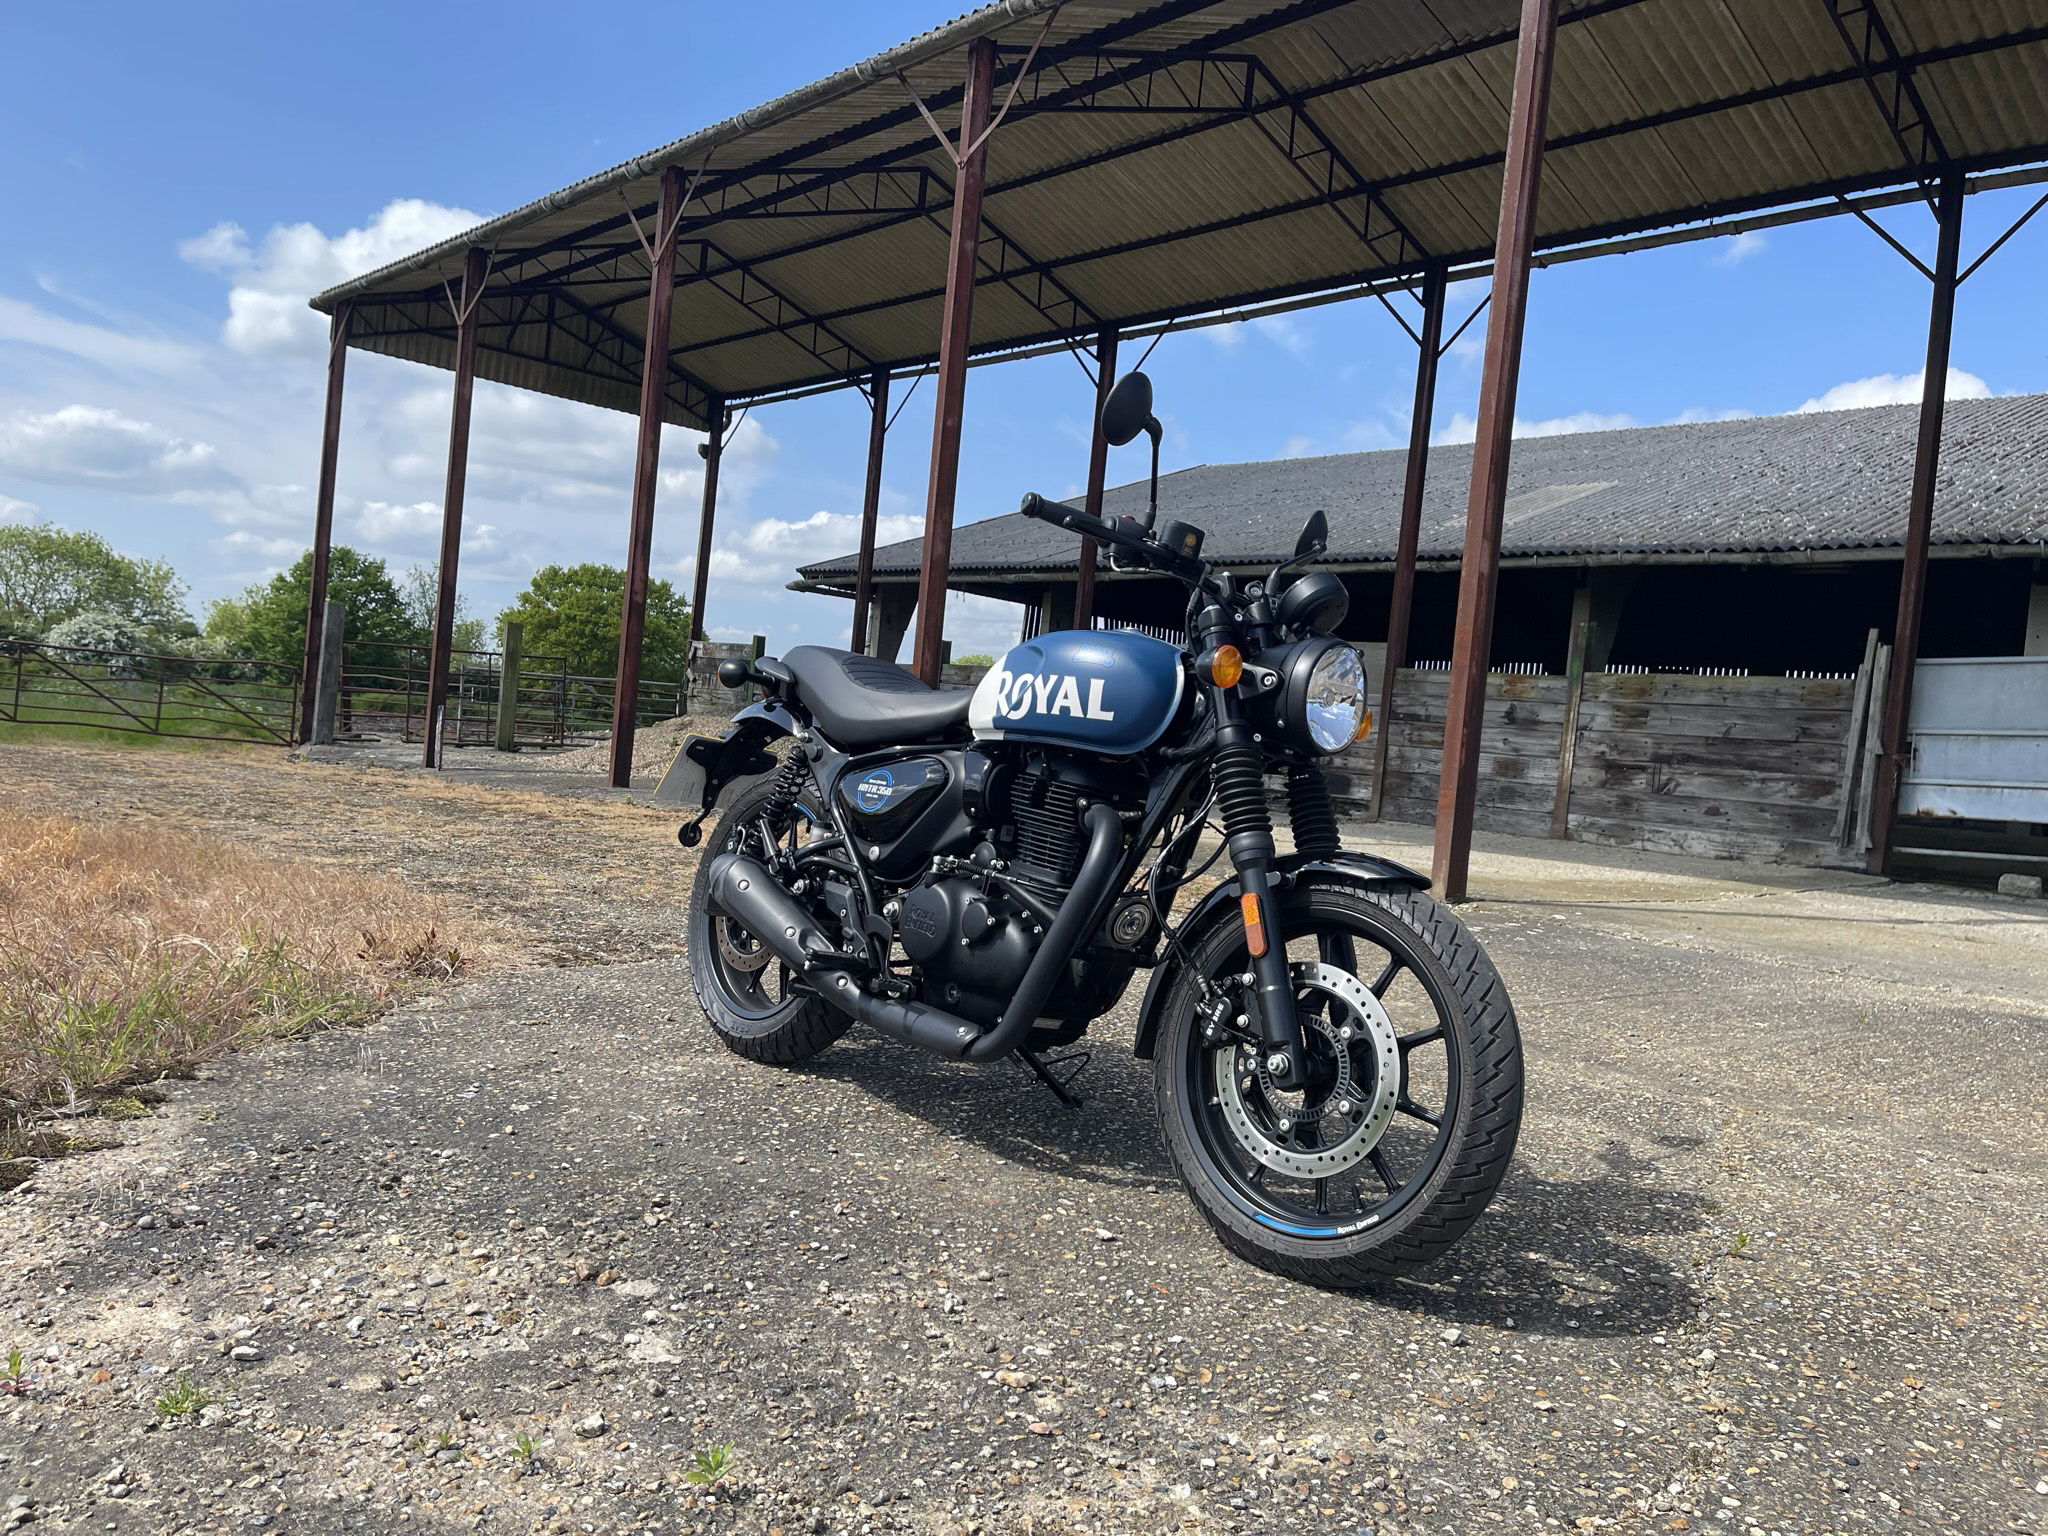 Royal Enfield Hunter 350 in Rebel Blue in front of industrial background